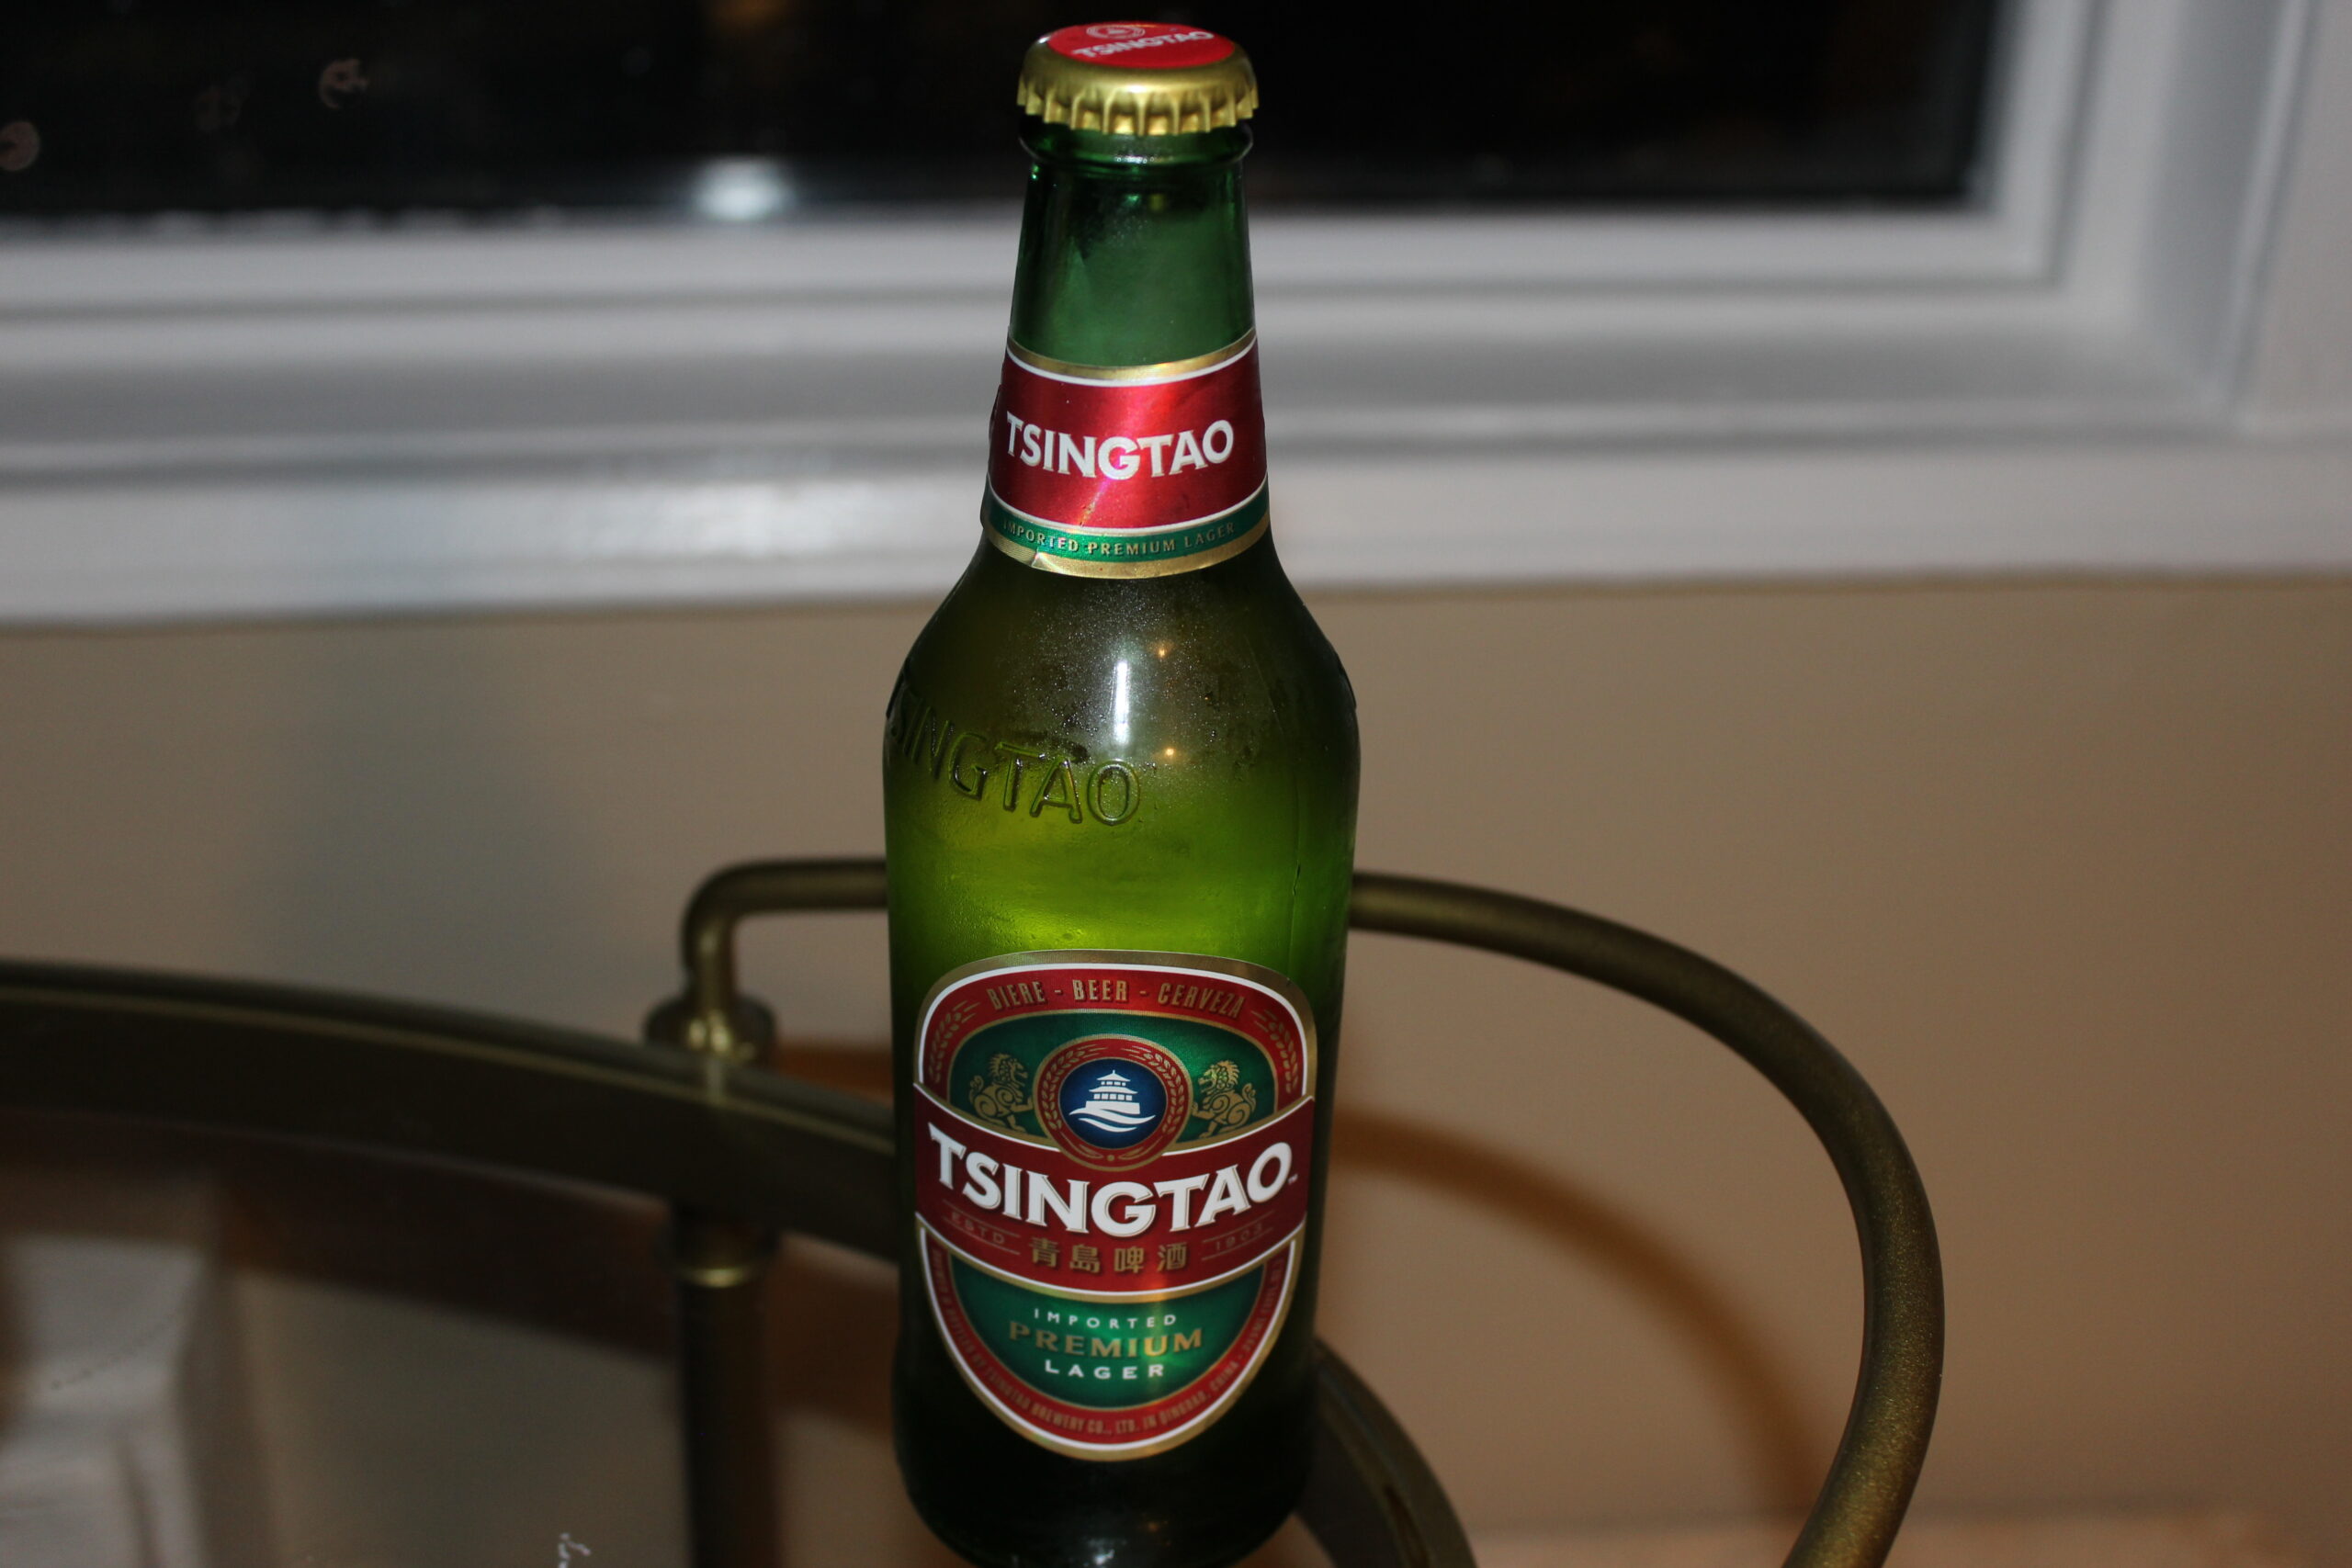 Tsingtao is Now in the USA